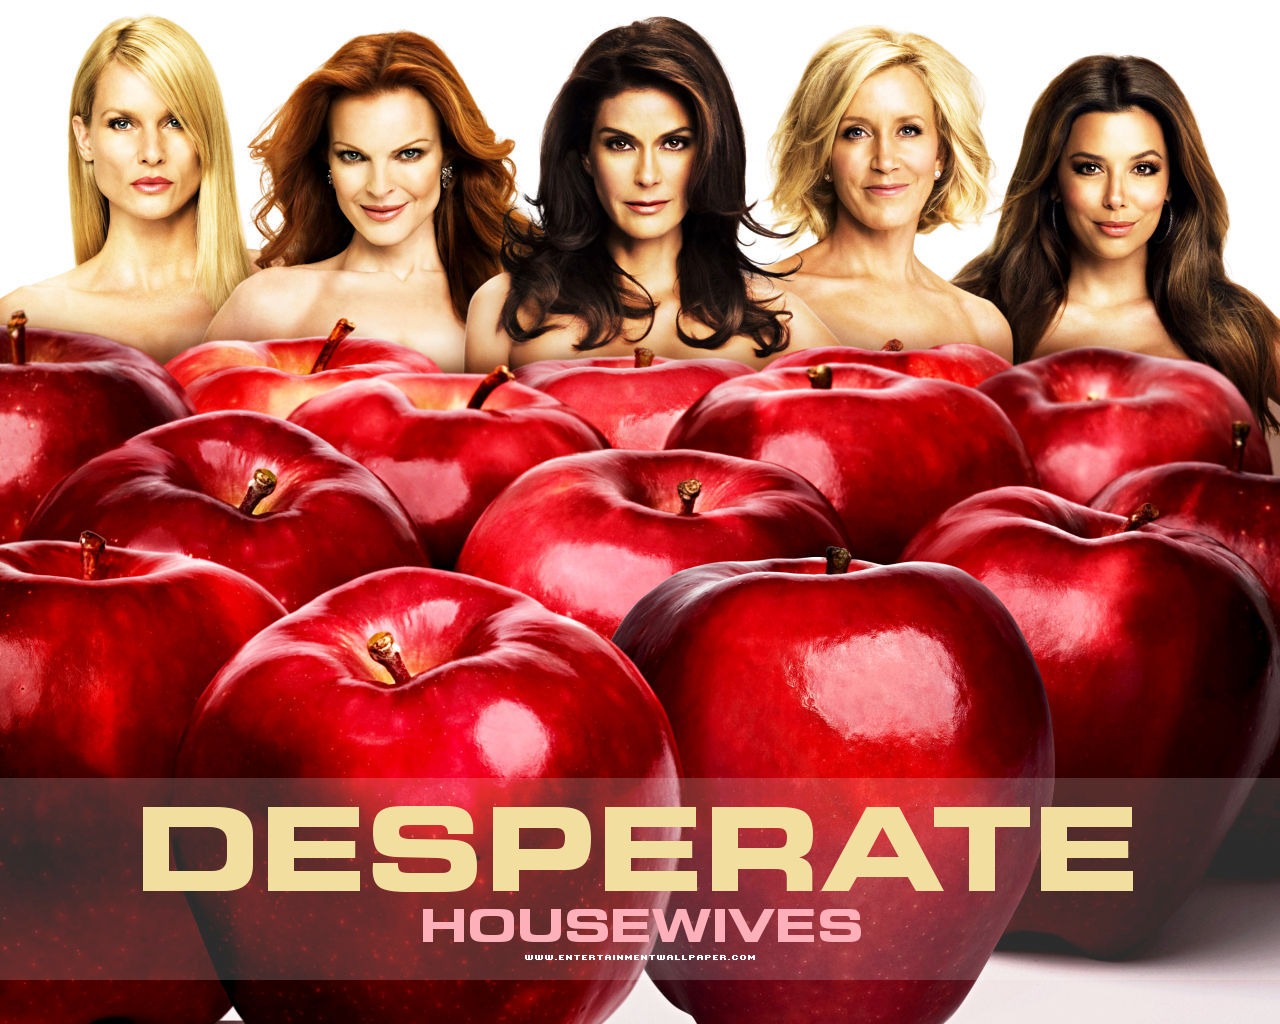 Desperate Housewives 絕望的主婦 #35 - 1280x1024